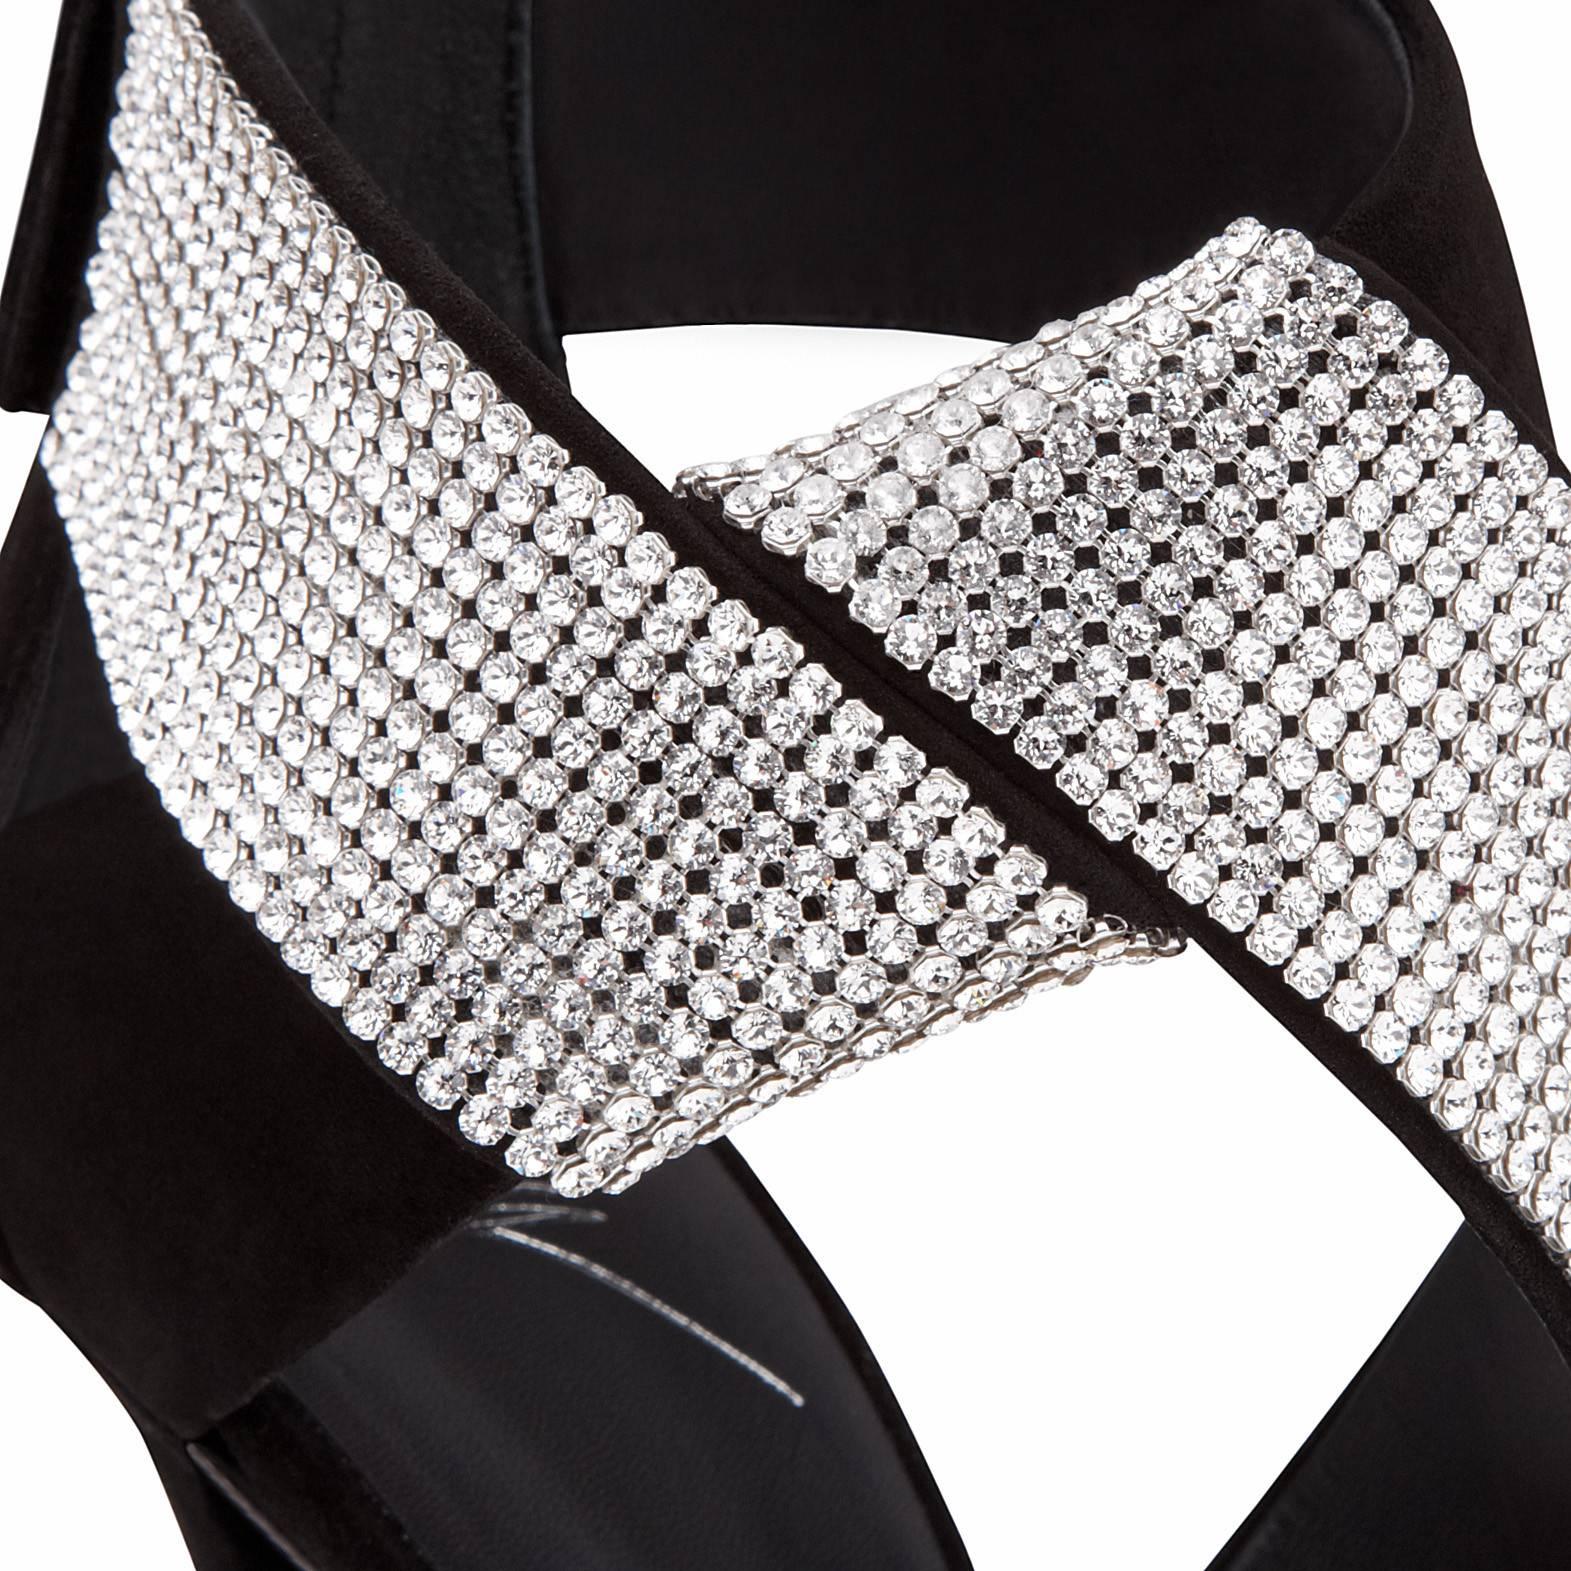 Giuseppe Zanotti Black Suede Crystal Wrap Around Sandals Evening Heels in Box 

Size IT 36 
Suede
Crystal
Zipper back closure
Made in Italy
Heel height 4.75